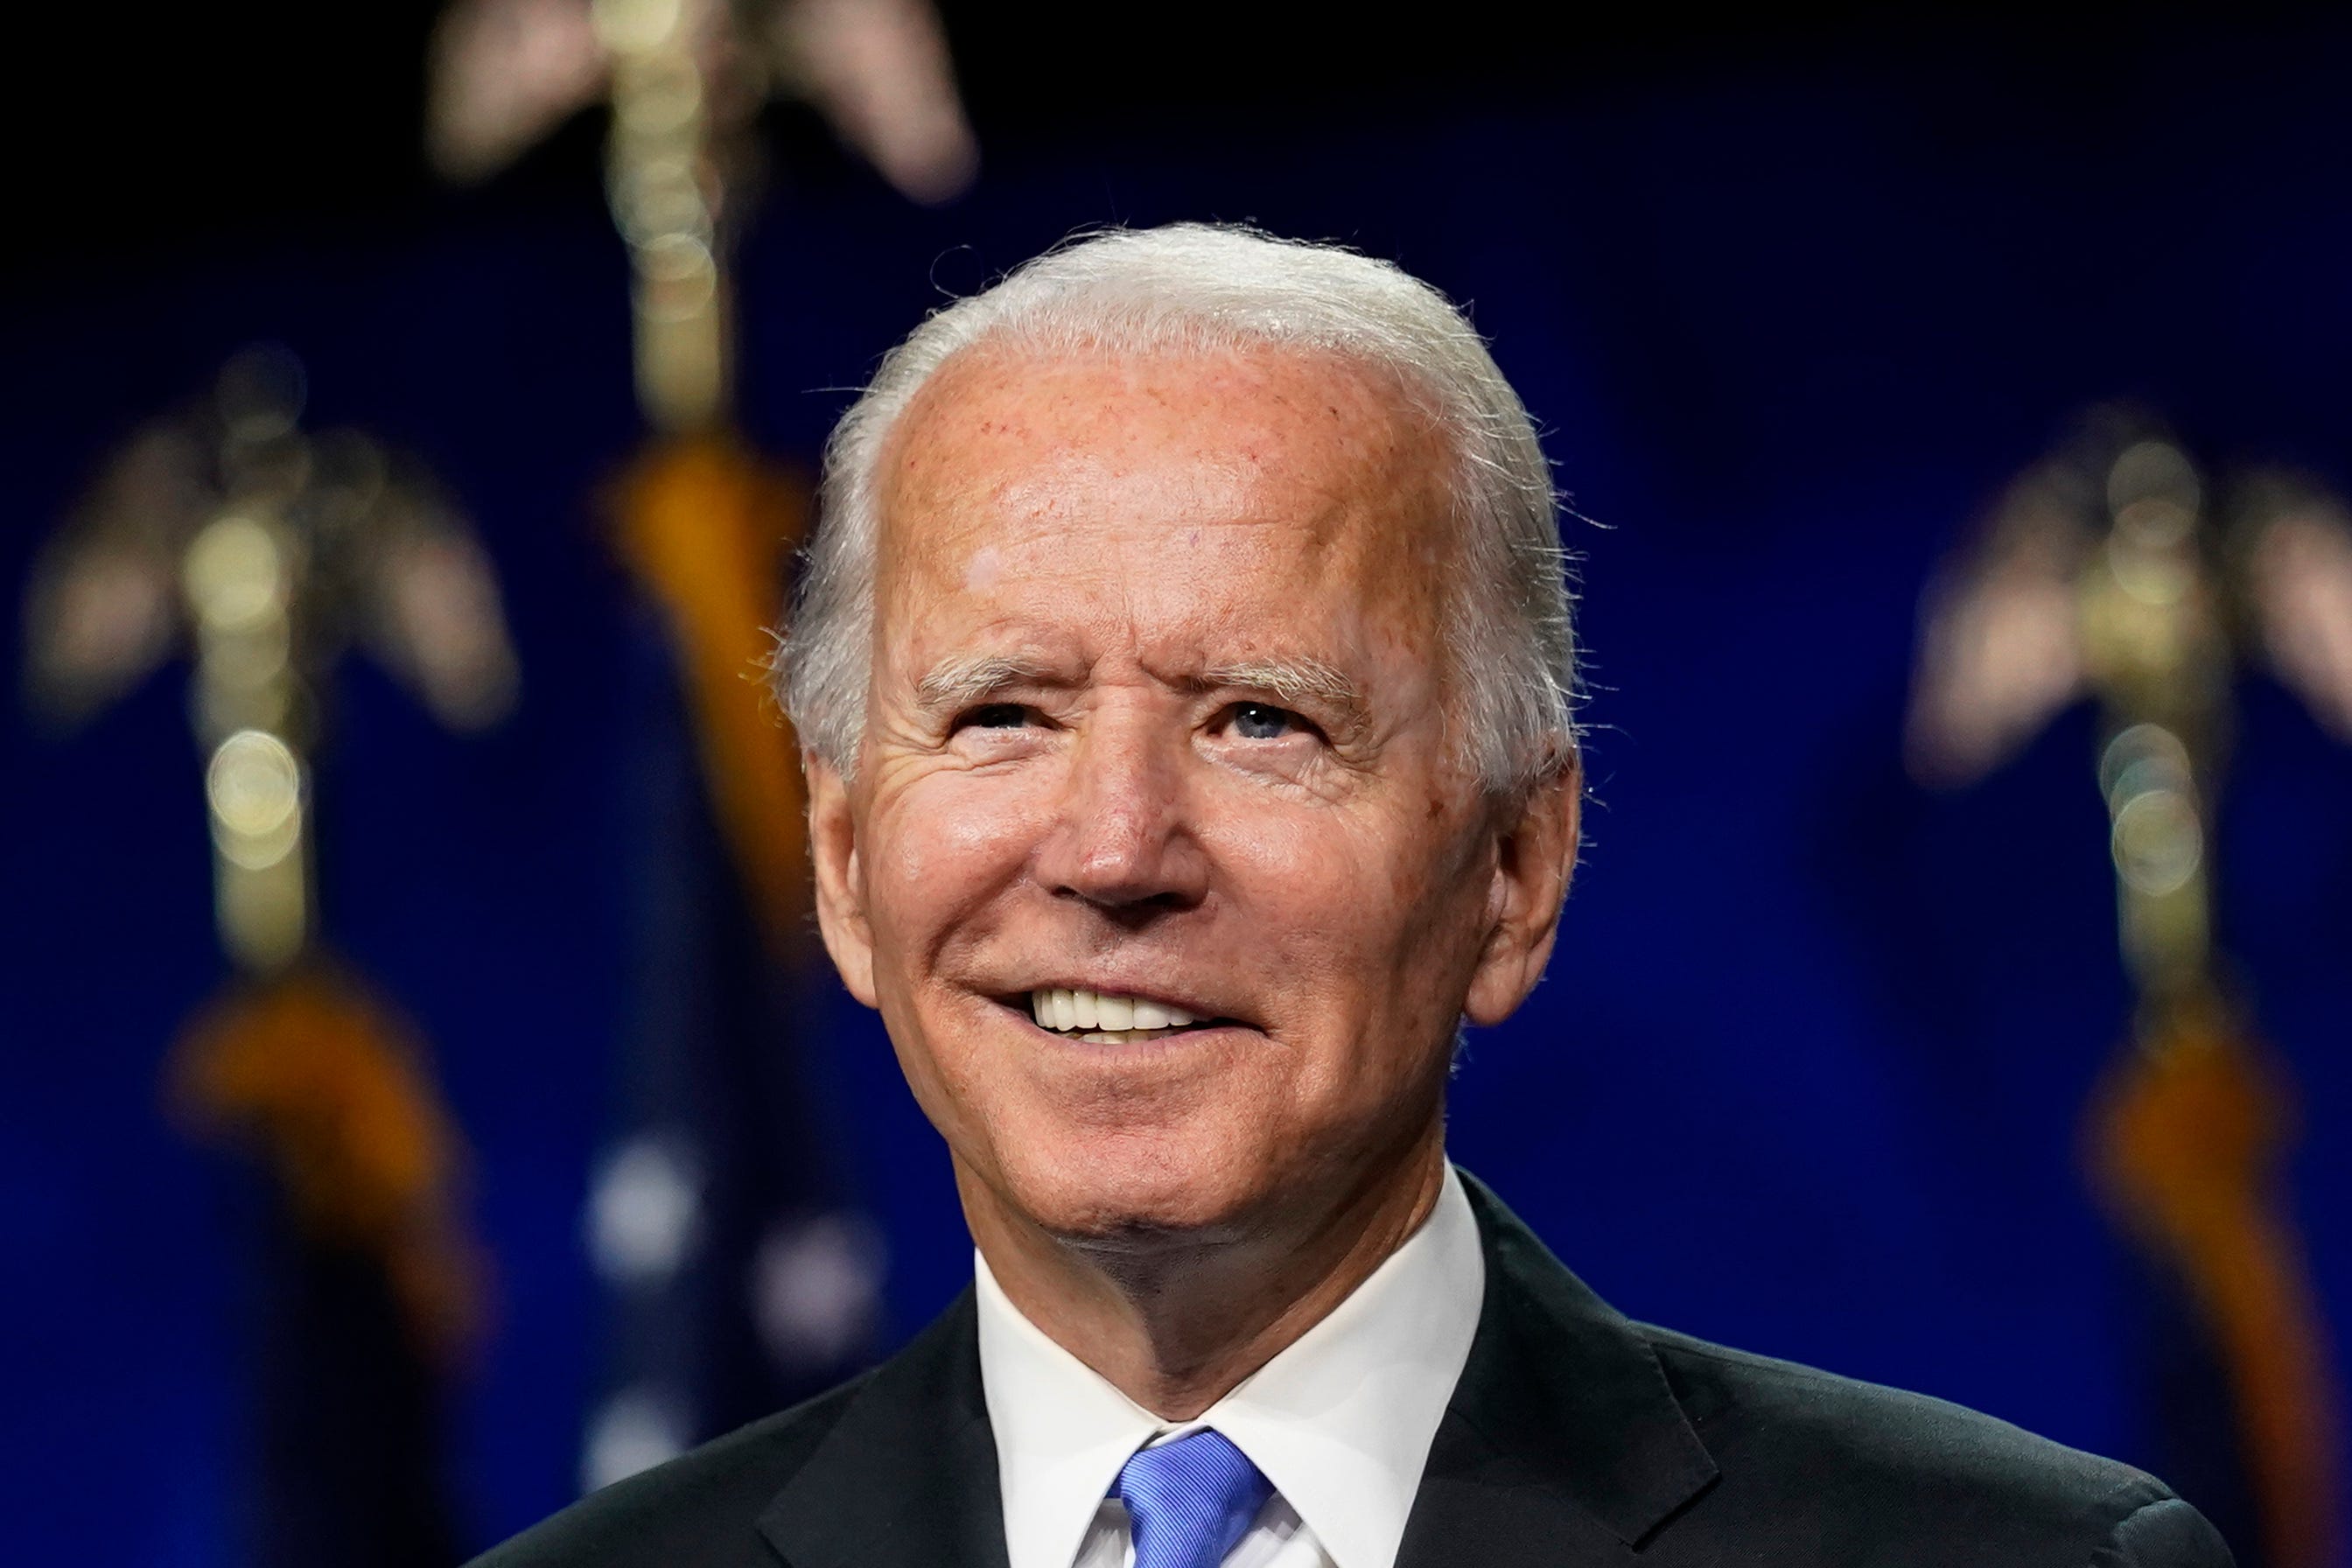 joe biden threatens withhold ukraine - Biden|President|Joe|States|Delaware|Obama|Vice|Senate|Campaign|Election|Time|Administration|House|Law|People|Years|Family|Year|Trump|School|University|Senator|Office|Party|Country|Committee|Act|War|Days|Climate|Hunter|Health|America|State|Day|Democrats|Americans|Documents|Care|Plan|United States|Vice President|White House|Joe Biden|Biden Administration|Democratic Party|Law School|Presidential Election|President Joe Biden|Executive Orders|Foreign Relations Committee|Presidential Campaign|Second Term|47Th Vice President|Syracuse University|Climate Change|Hillary Clinton|Last Year|Barack Obama|Joseph Robinette Biden|U.S. Senator|Health Care|U.S. Senate|Donald Trump|President Trump|President Biden|Federal Register|Judiciary Committee|Presidential Nomination|Presidential Medal